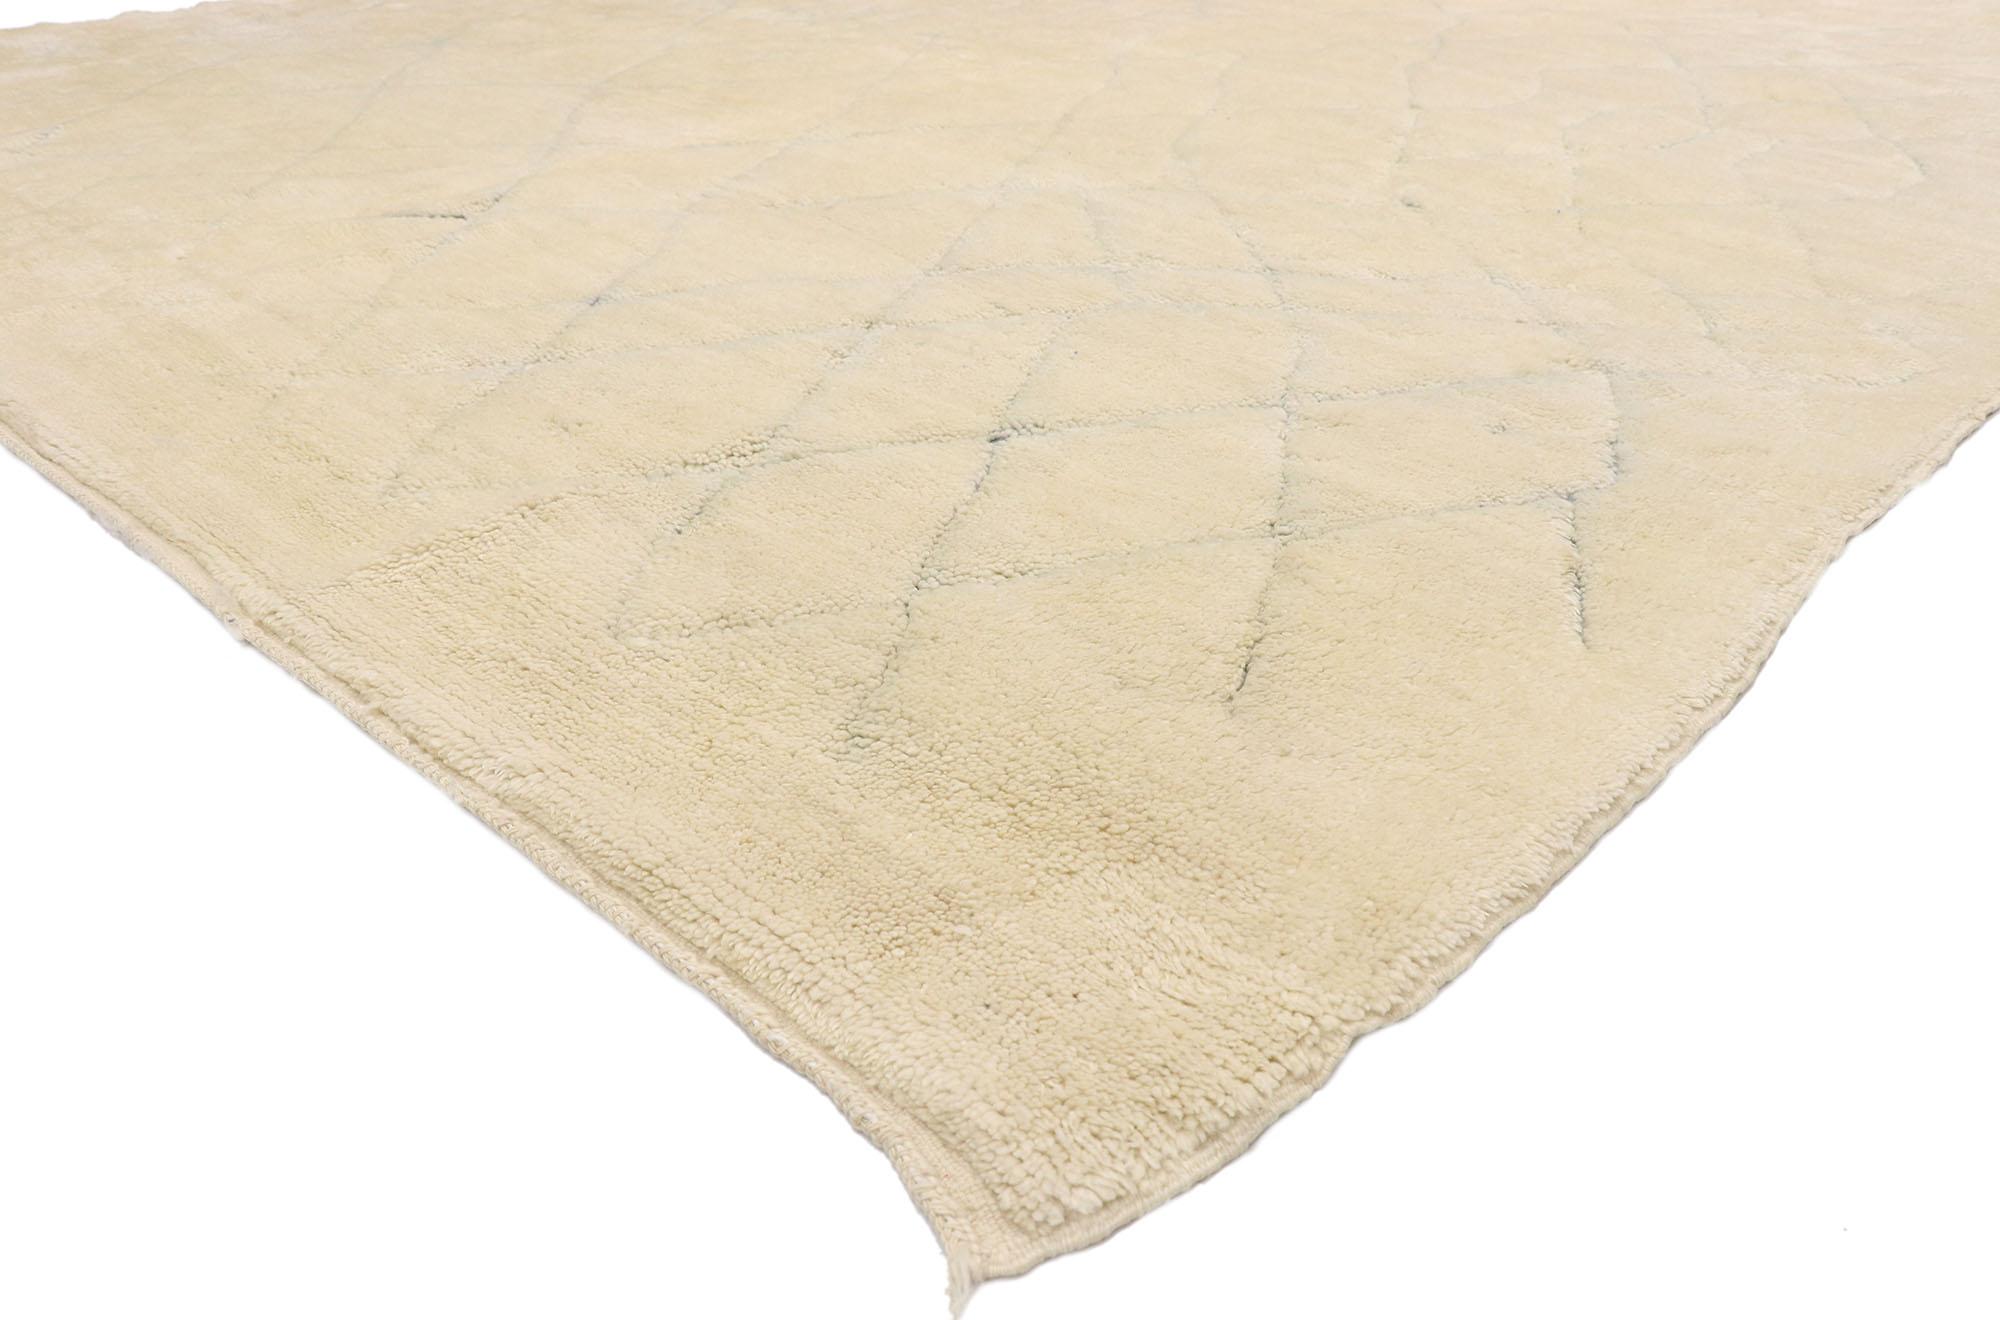 21083, new contemporary Moroccan rug with Cozy Hygge vibes and organic modern style 10'04 x 13'11. With its simplicity, plush pile and Hygge vibes, this hand knotted wool contemporary Moroccan area rug provides a feeling of cozy contentment. It